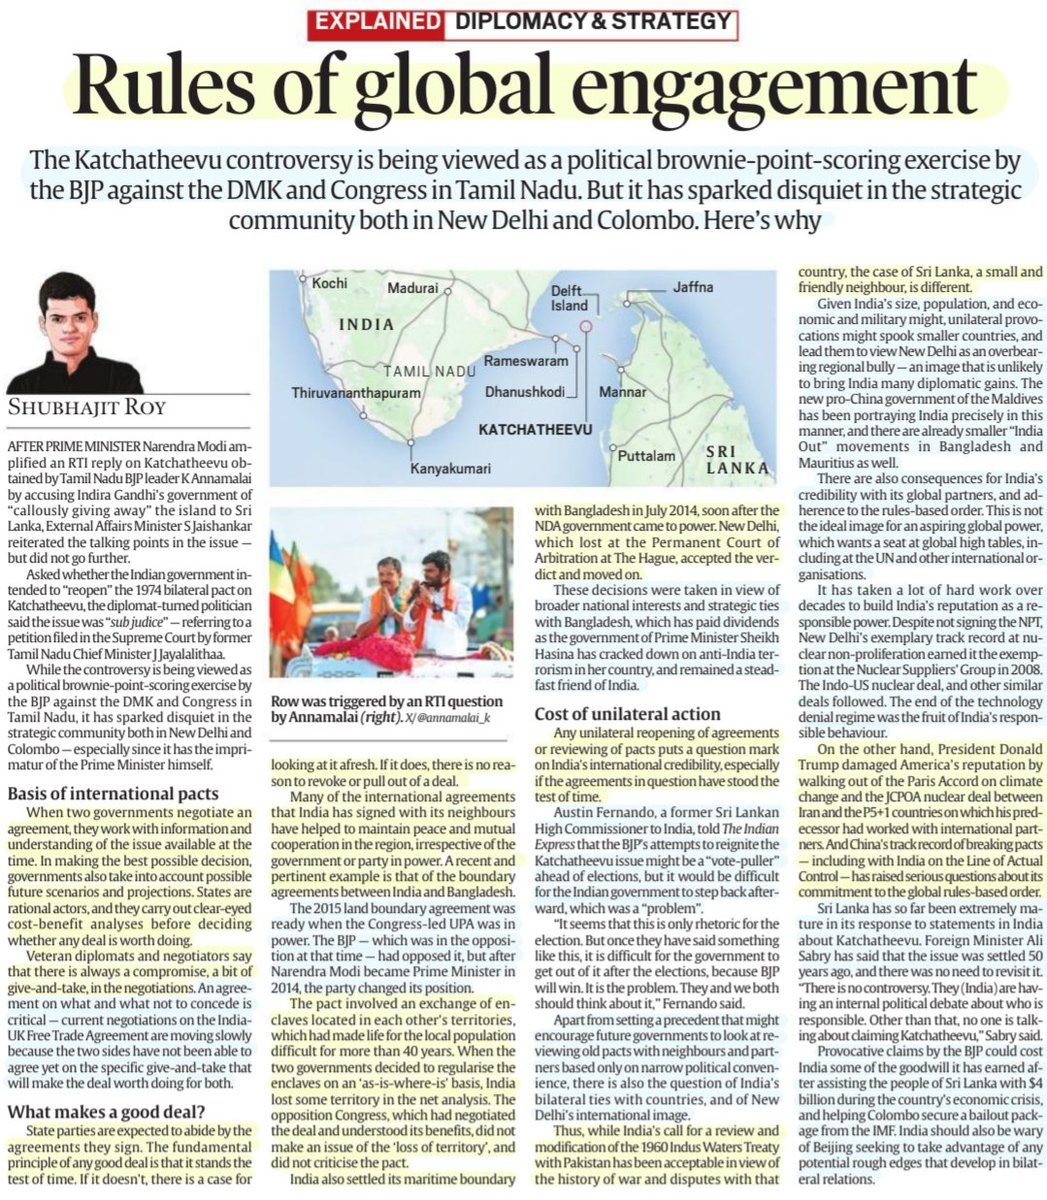 'Rules of Global engagement'

:Well explained by Sh Shubhajit Roy
@ShubhajitRoy

Recent #KatchatheevuIssue ,Basis of #international pacts,various aspects of deals,cost of unilateral actions,impact on India's standing &more info

#India #Srilanka #Bangladesh 
#strategy #Diplomacy